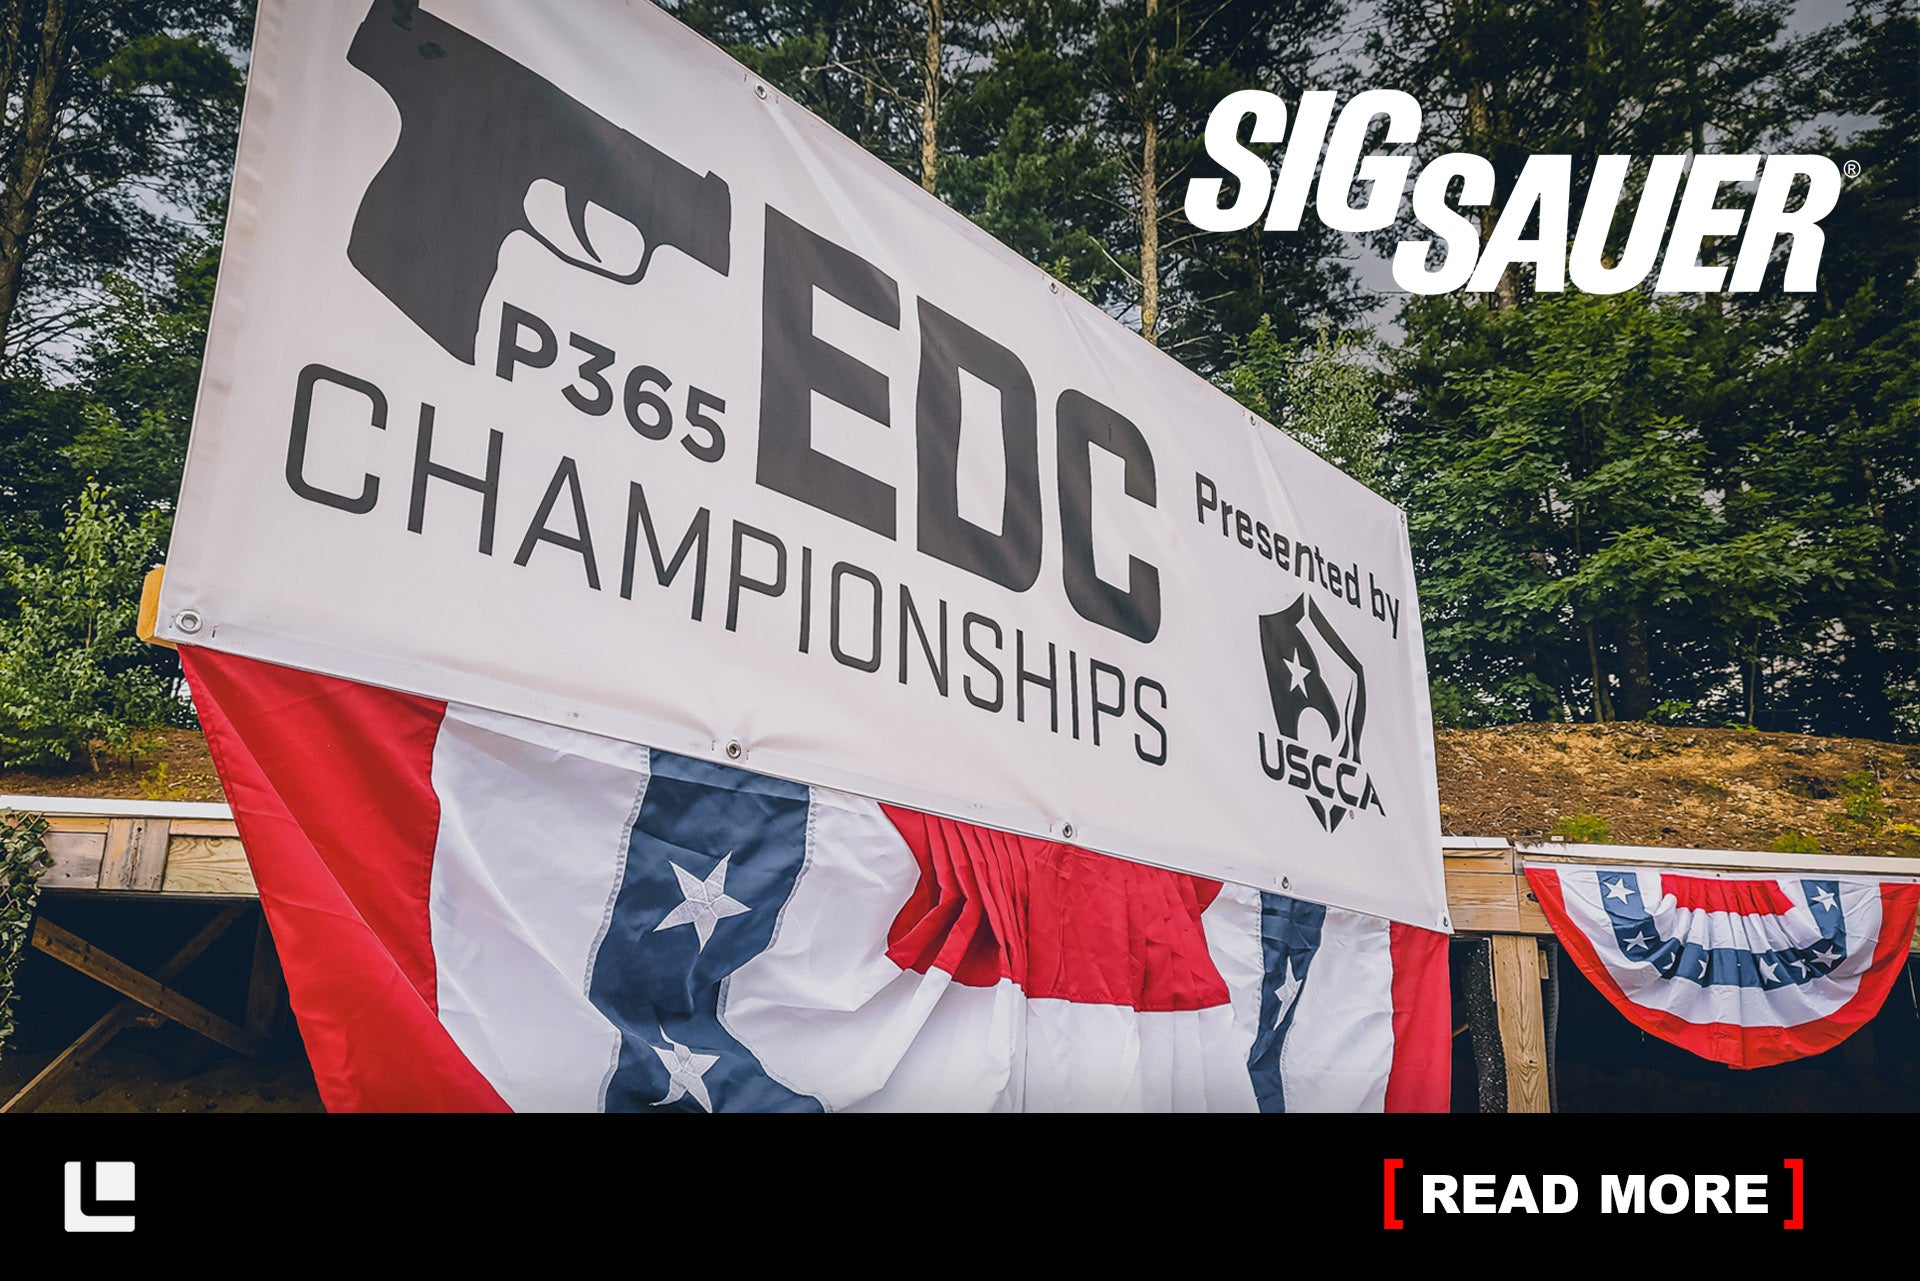 Leitner Partners with SIG Sauer Academy at P365 EDC Championships